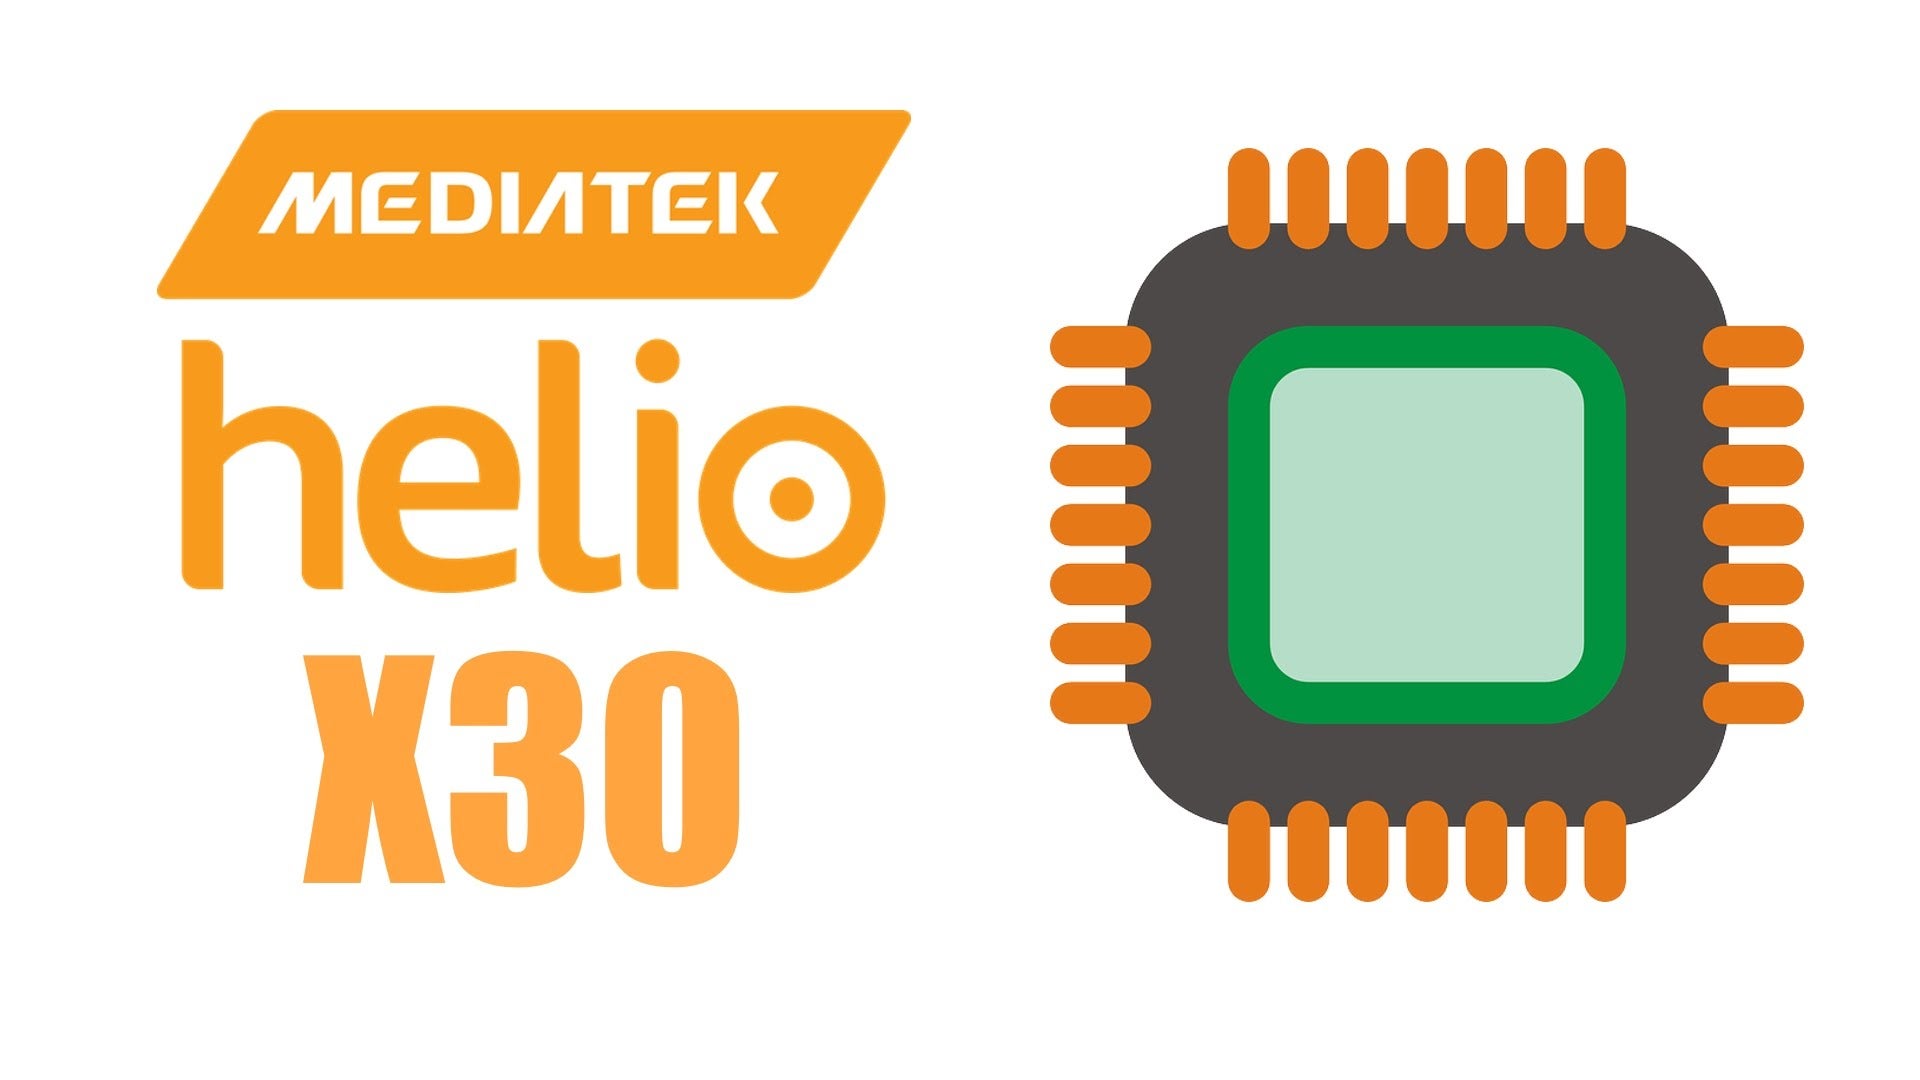 MediaTek's Helio X30 chipset is the poor man's Snapdragon 835 - These are the rumored specs and working titles for Xiaomi’s three Mi 6 variants